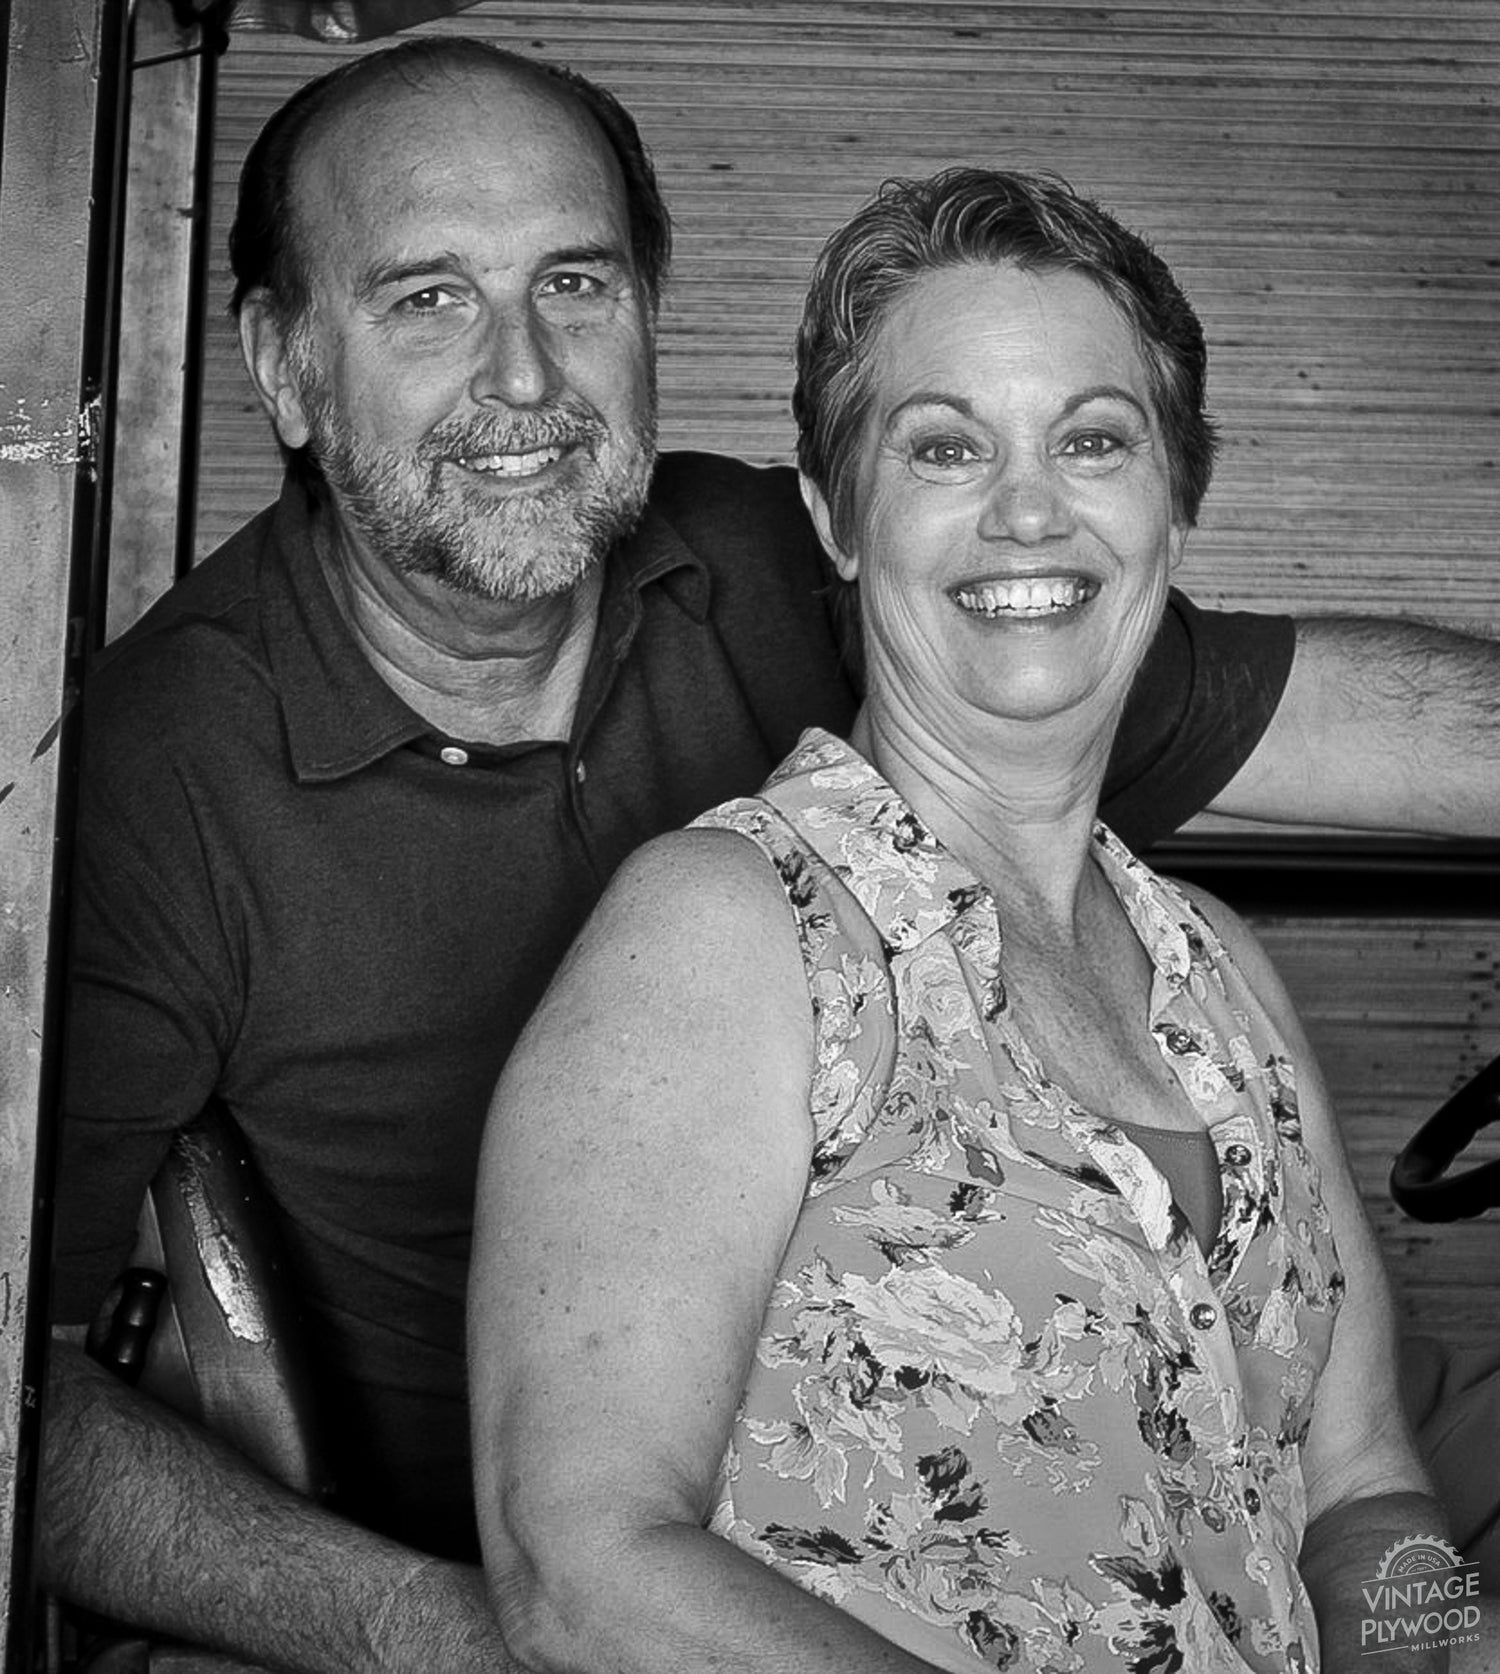 Jeff and Annette Nichols, owners of Vintage Plywood Millworks, smiling while sitting on a forklift